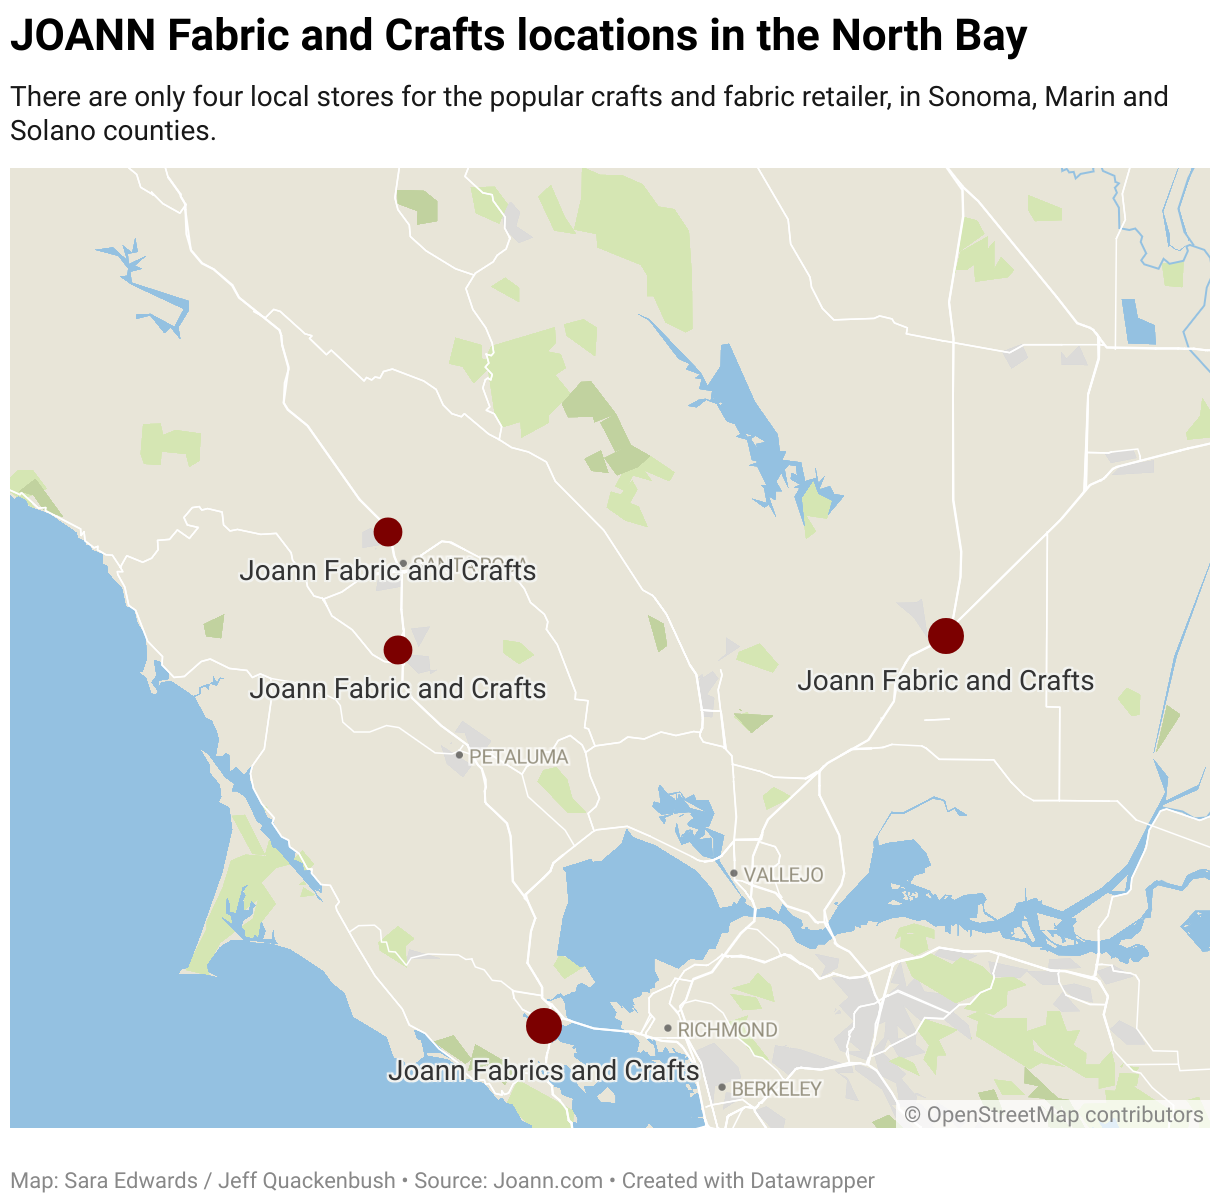 Crafts and Fabrics Retailer Joann Files for Bankruptcy